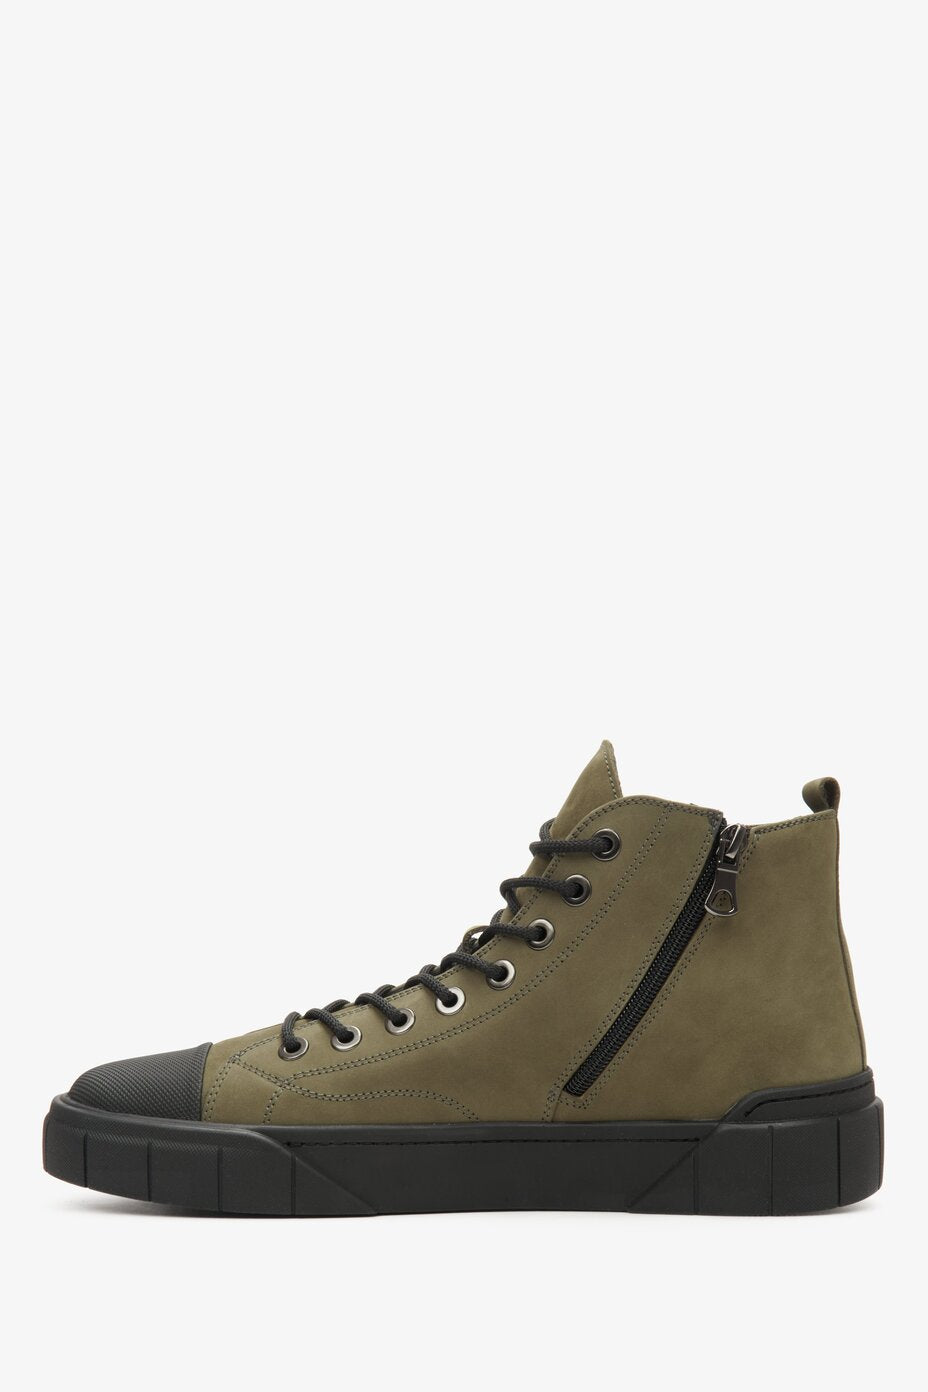 High-top men's lace-up sneakers in green by Estro - shoe profile.